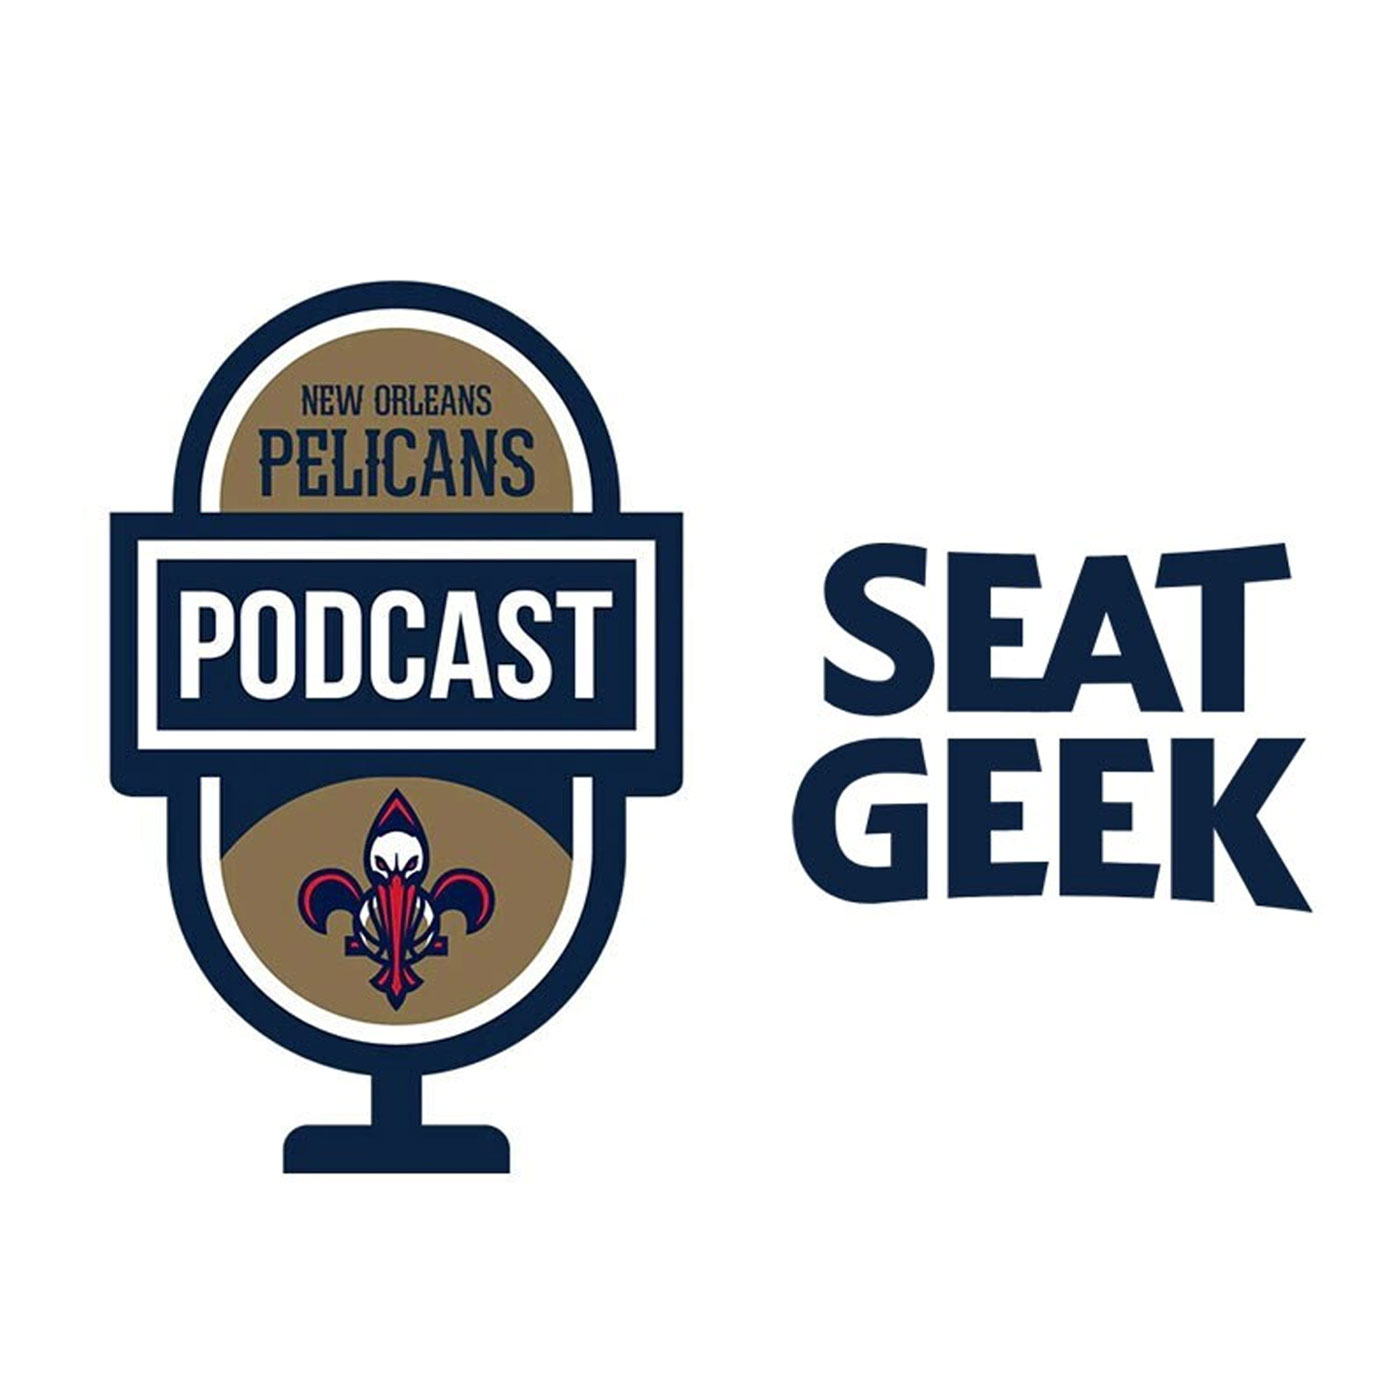 Rod Walker on the New Orleans Pelicans Podcast presented by SeatGeek - April 4, 2022